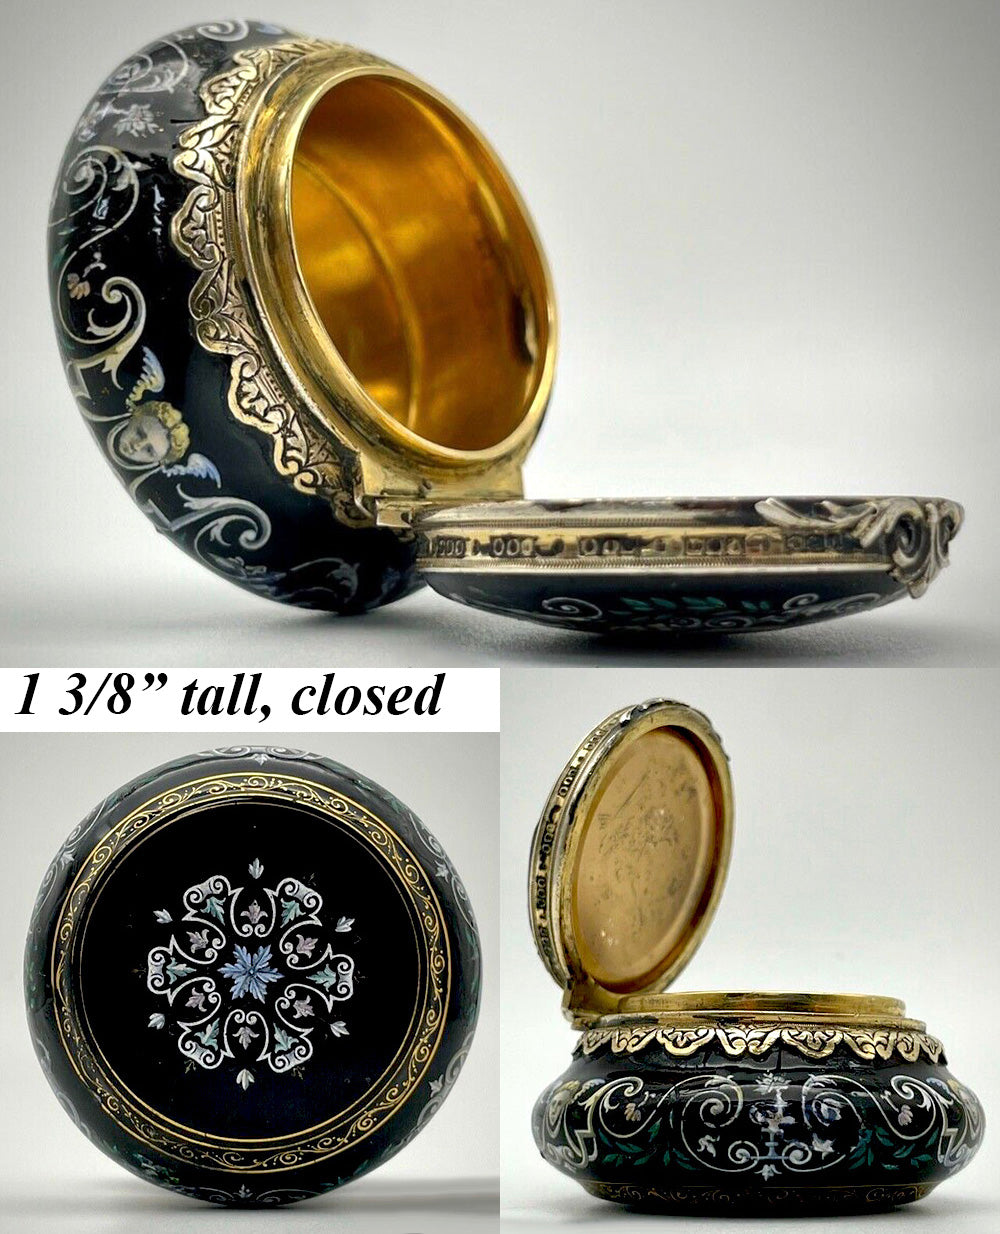 Stunning Antique 19th Century French Limoges Kiln-fired Enamel Patch or BonBon Box, Neo-Renaissance